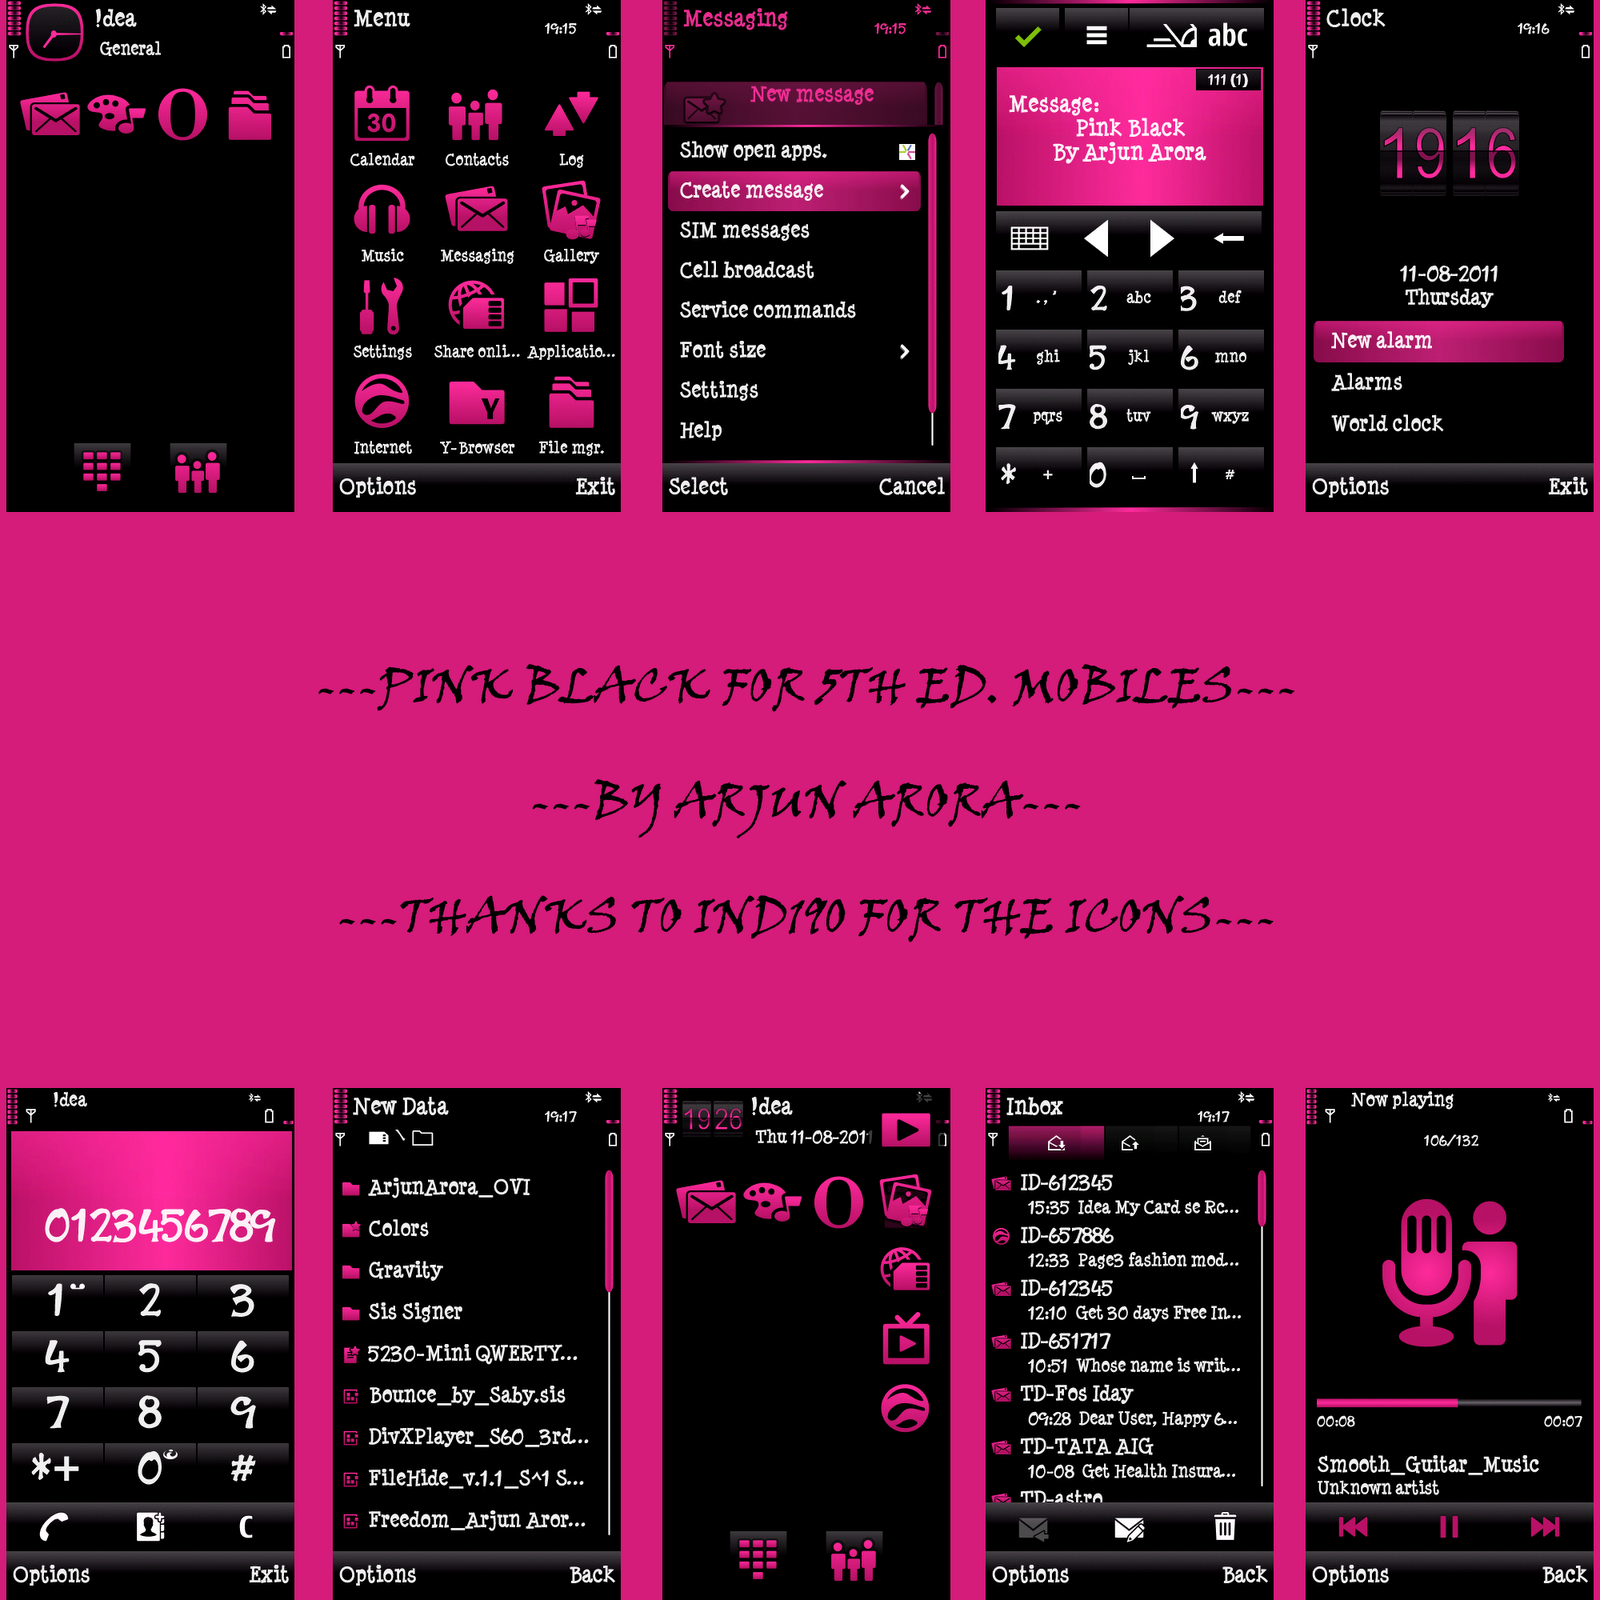 Nokia 5800 and N97 Theme #2539 - [Red & Pink] on Black By Arjun Arora